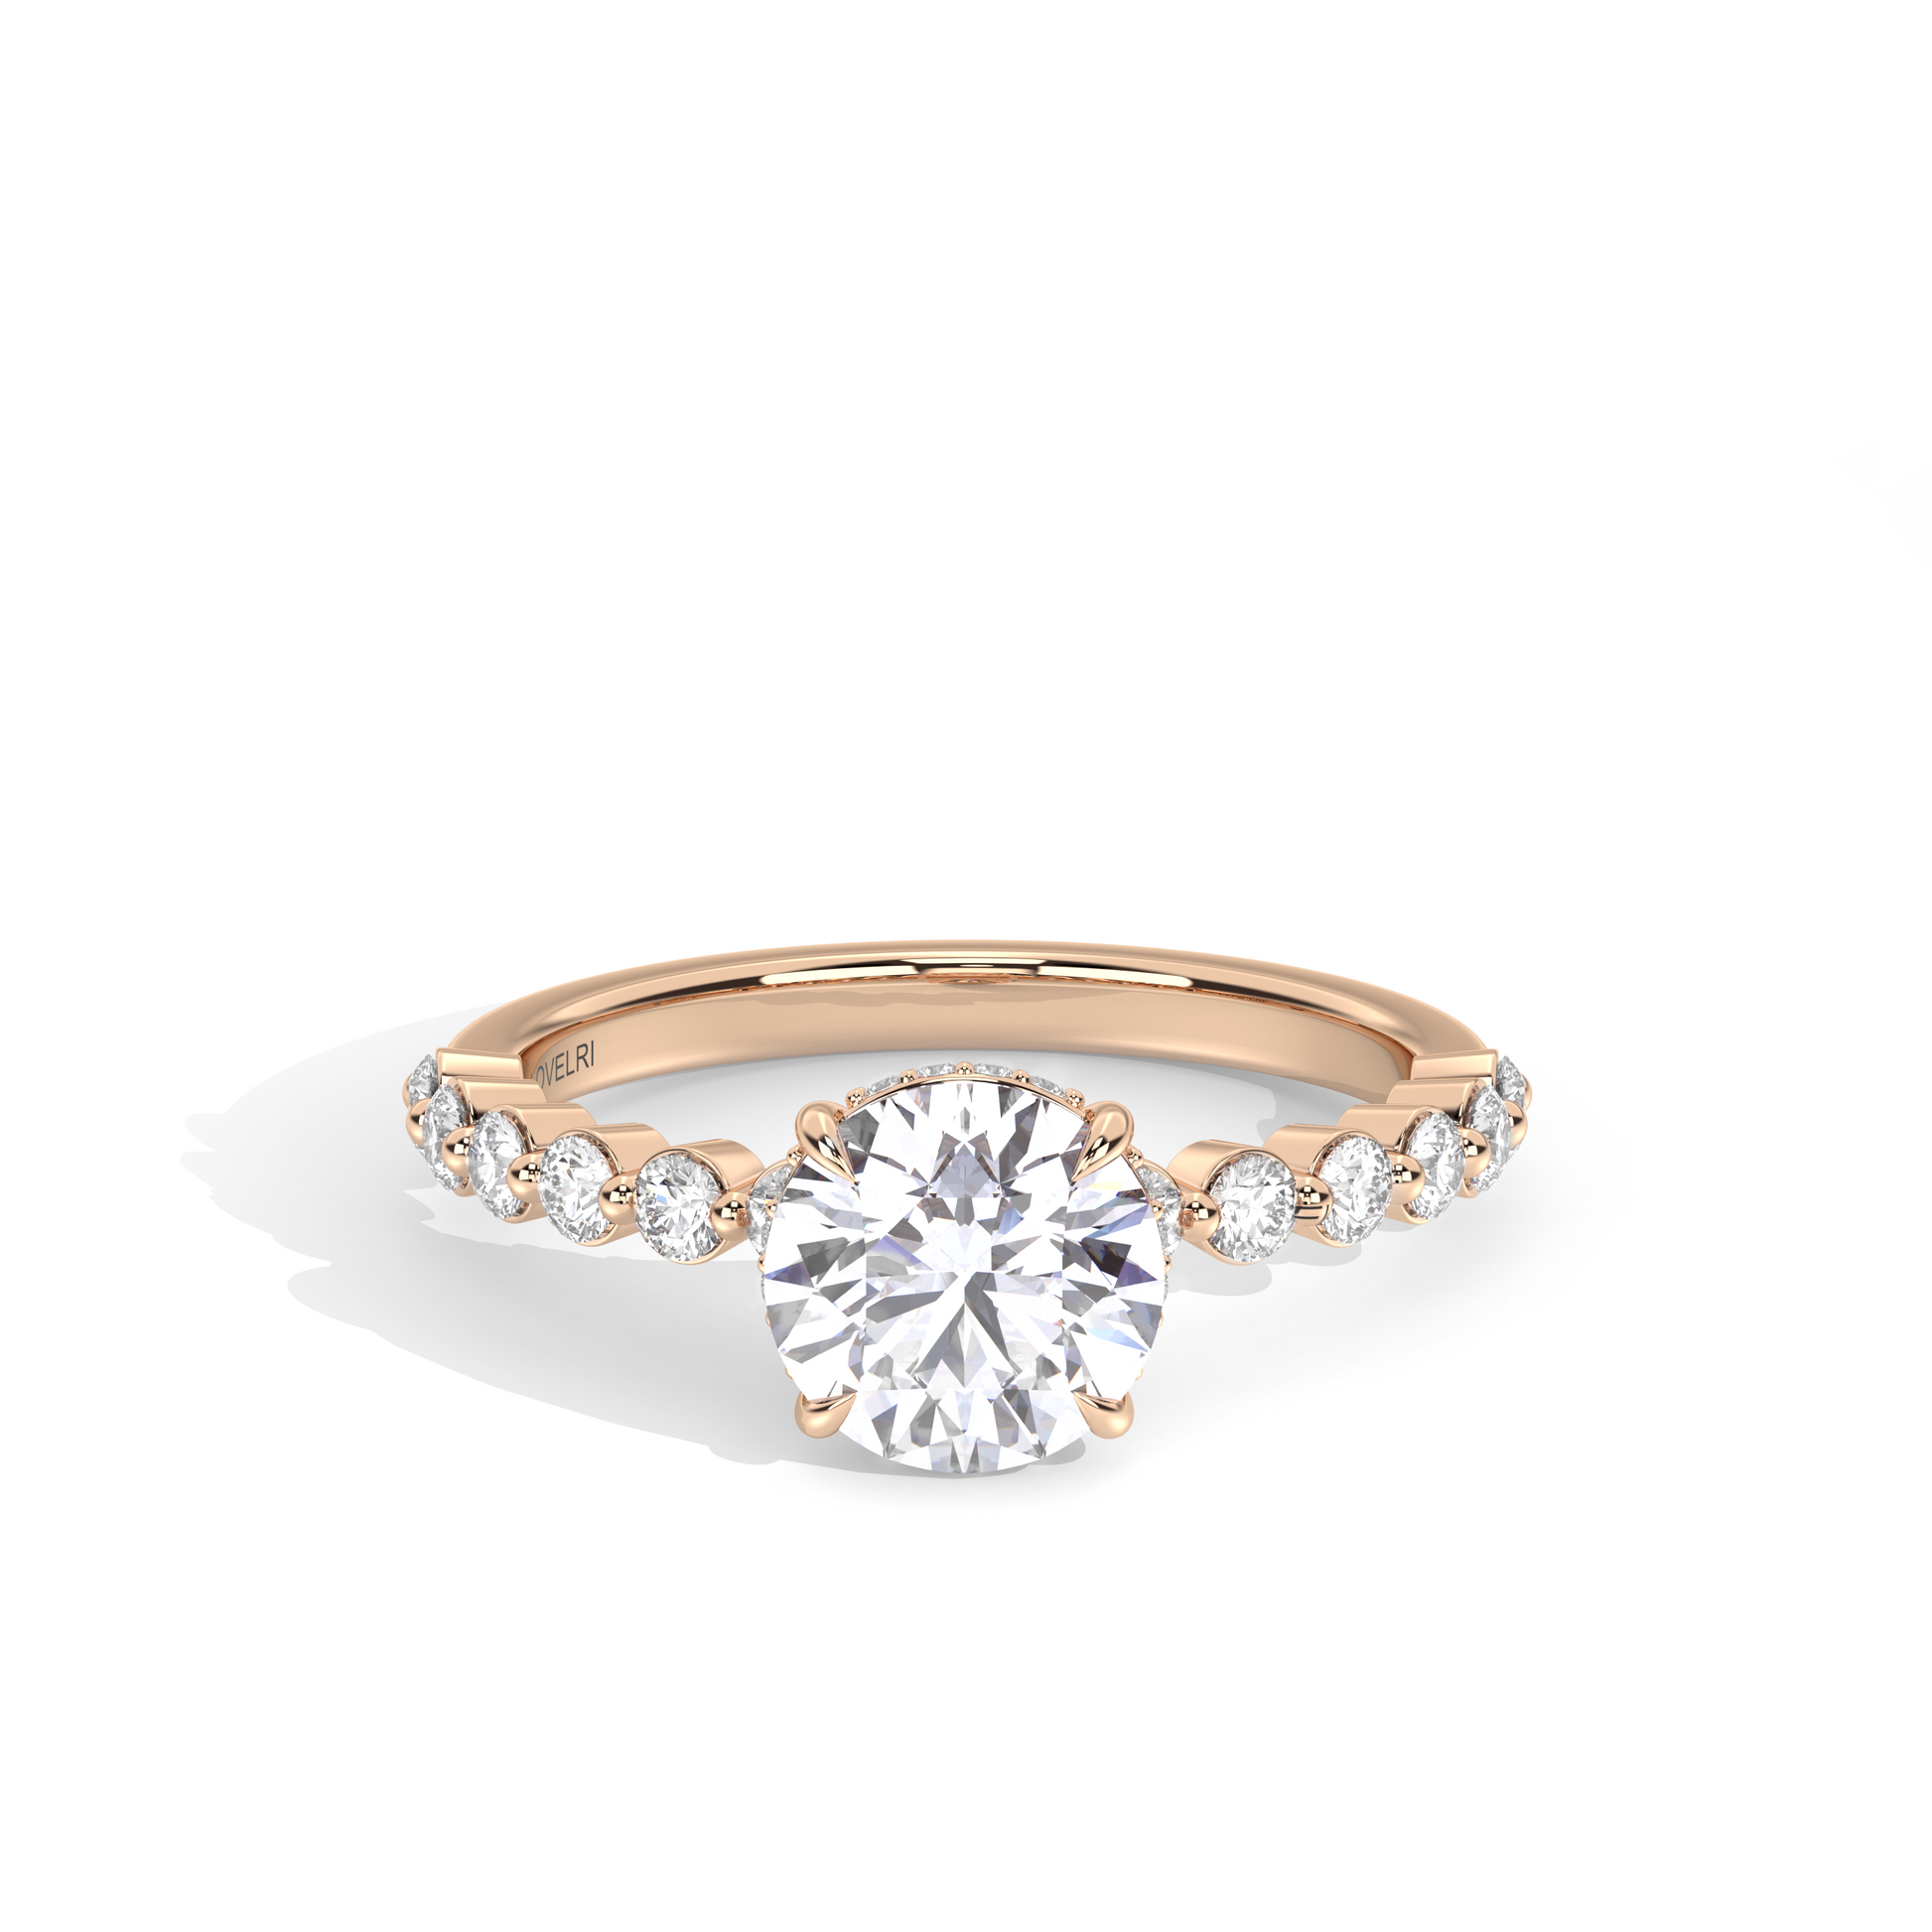 Front View - Scalloped Band Round Engagement Ring Rose Gold